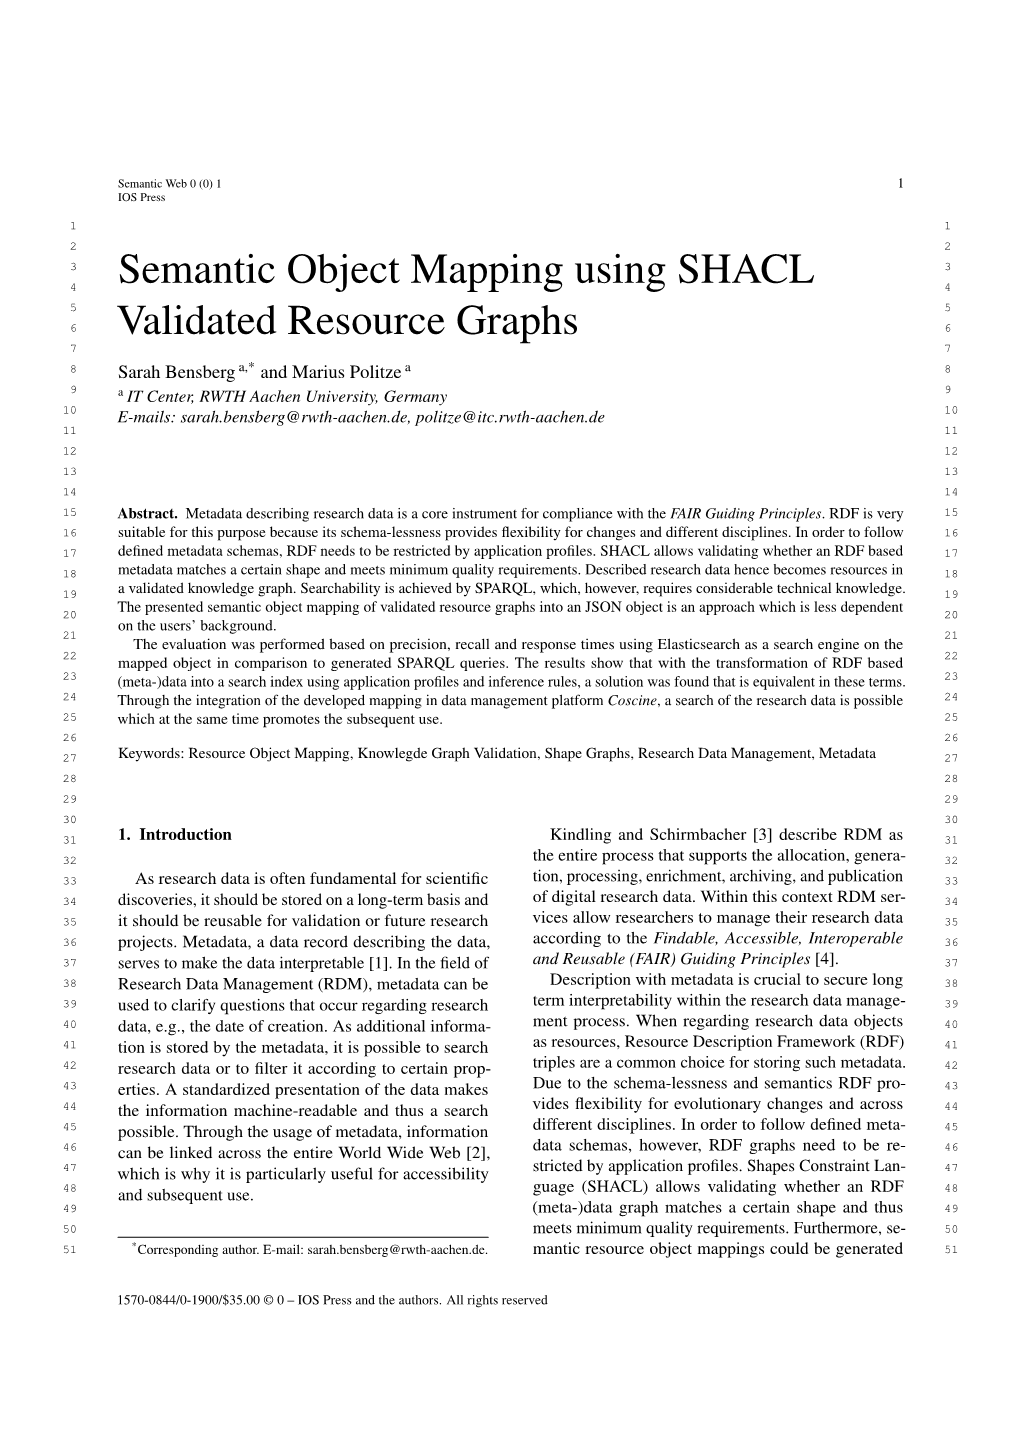 Semantic Object Mapping Using SHACL Validated Resource Graphs